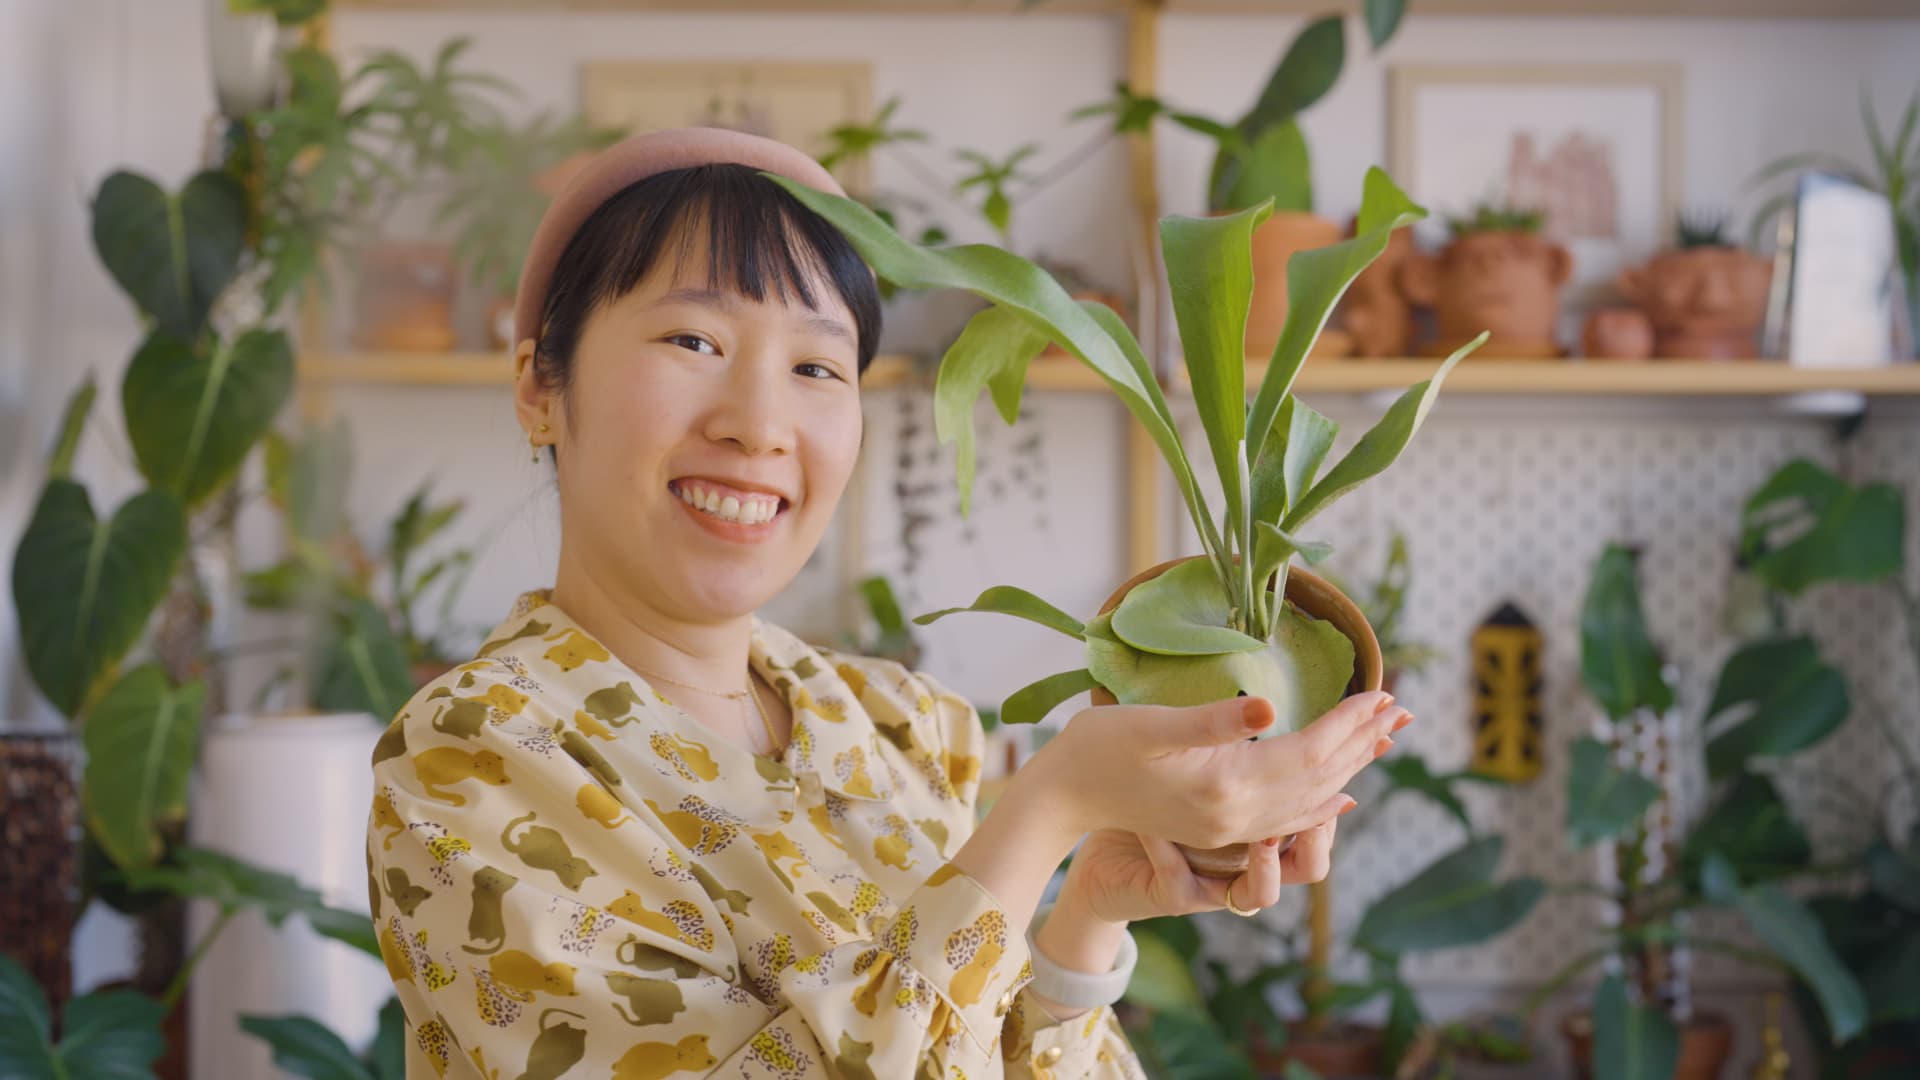 Wai says taking care of her plants is a form of self care.